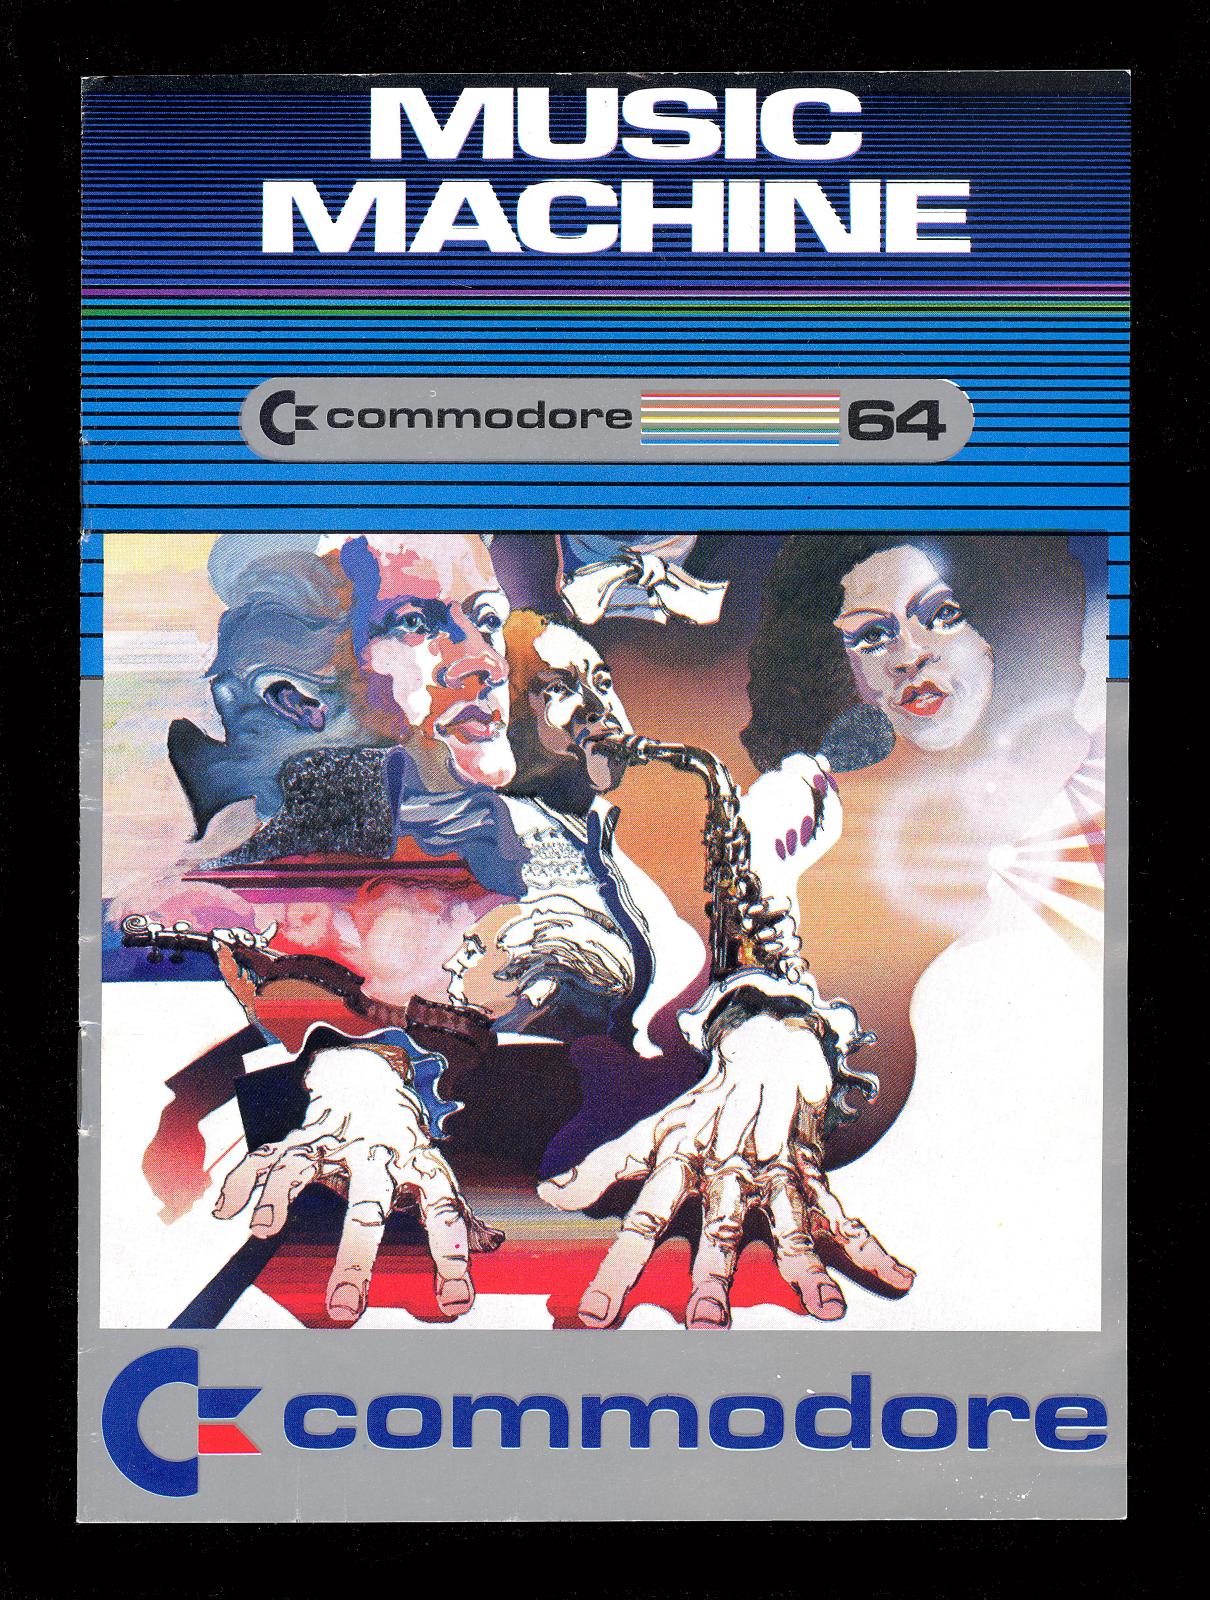 Front cover of Music Machine instruction book. Colour is primarily blue and silver with the text MUSIC MACHINE at the top of the page. A composite image of four people with musical instruments is below this.